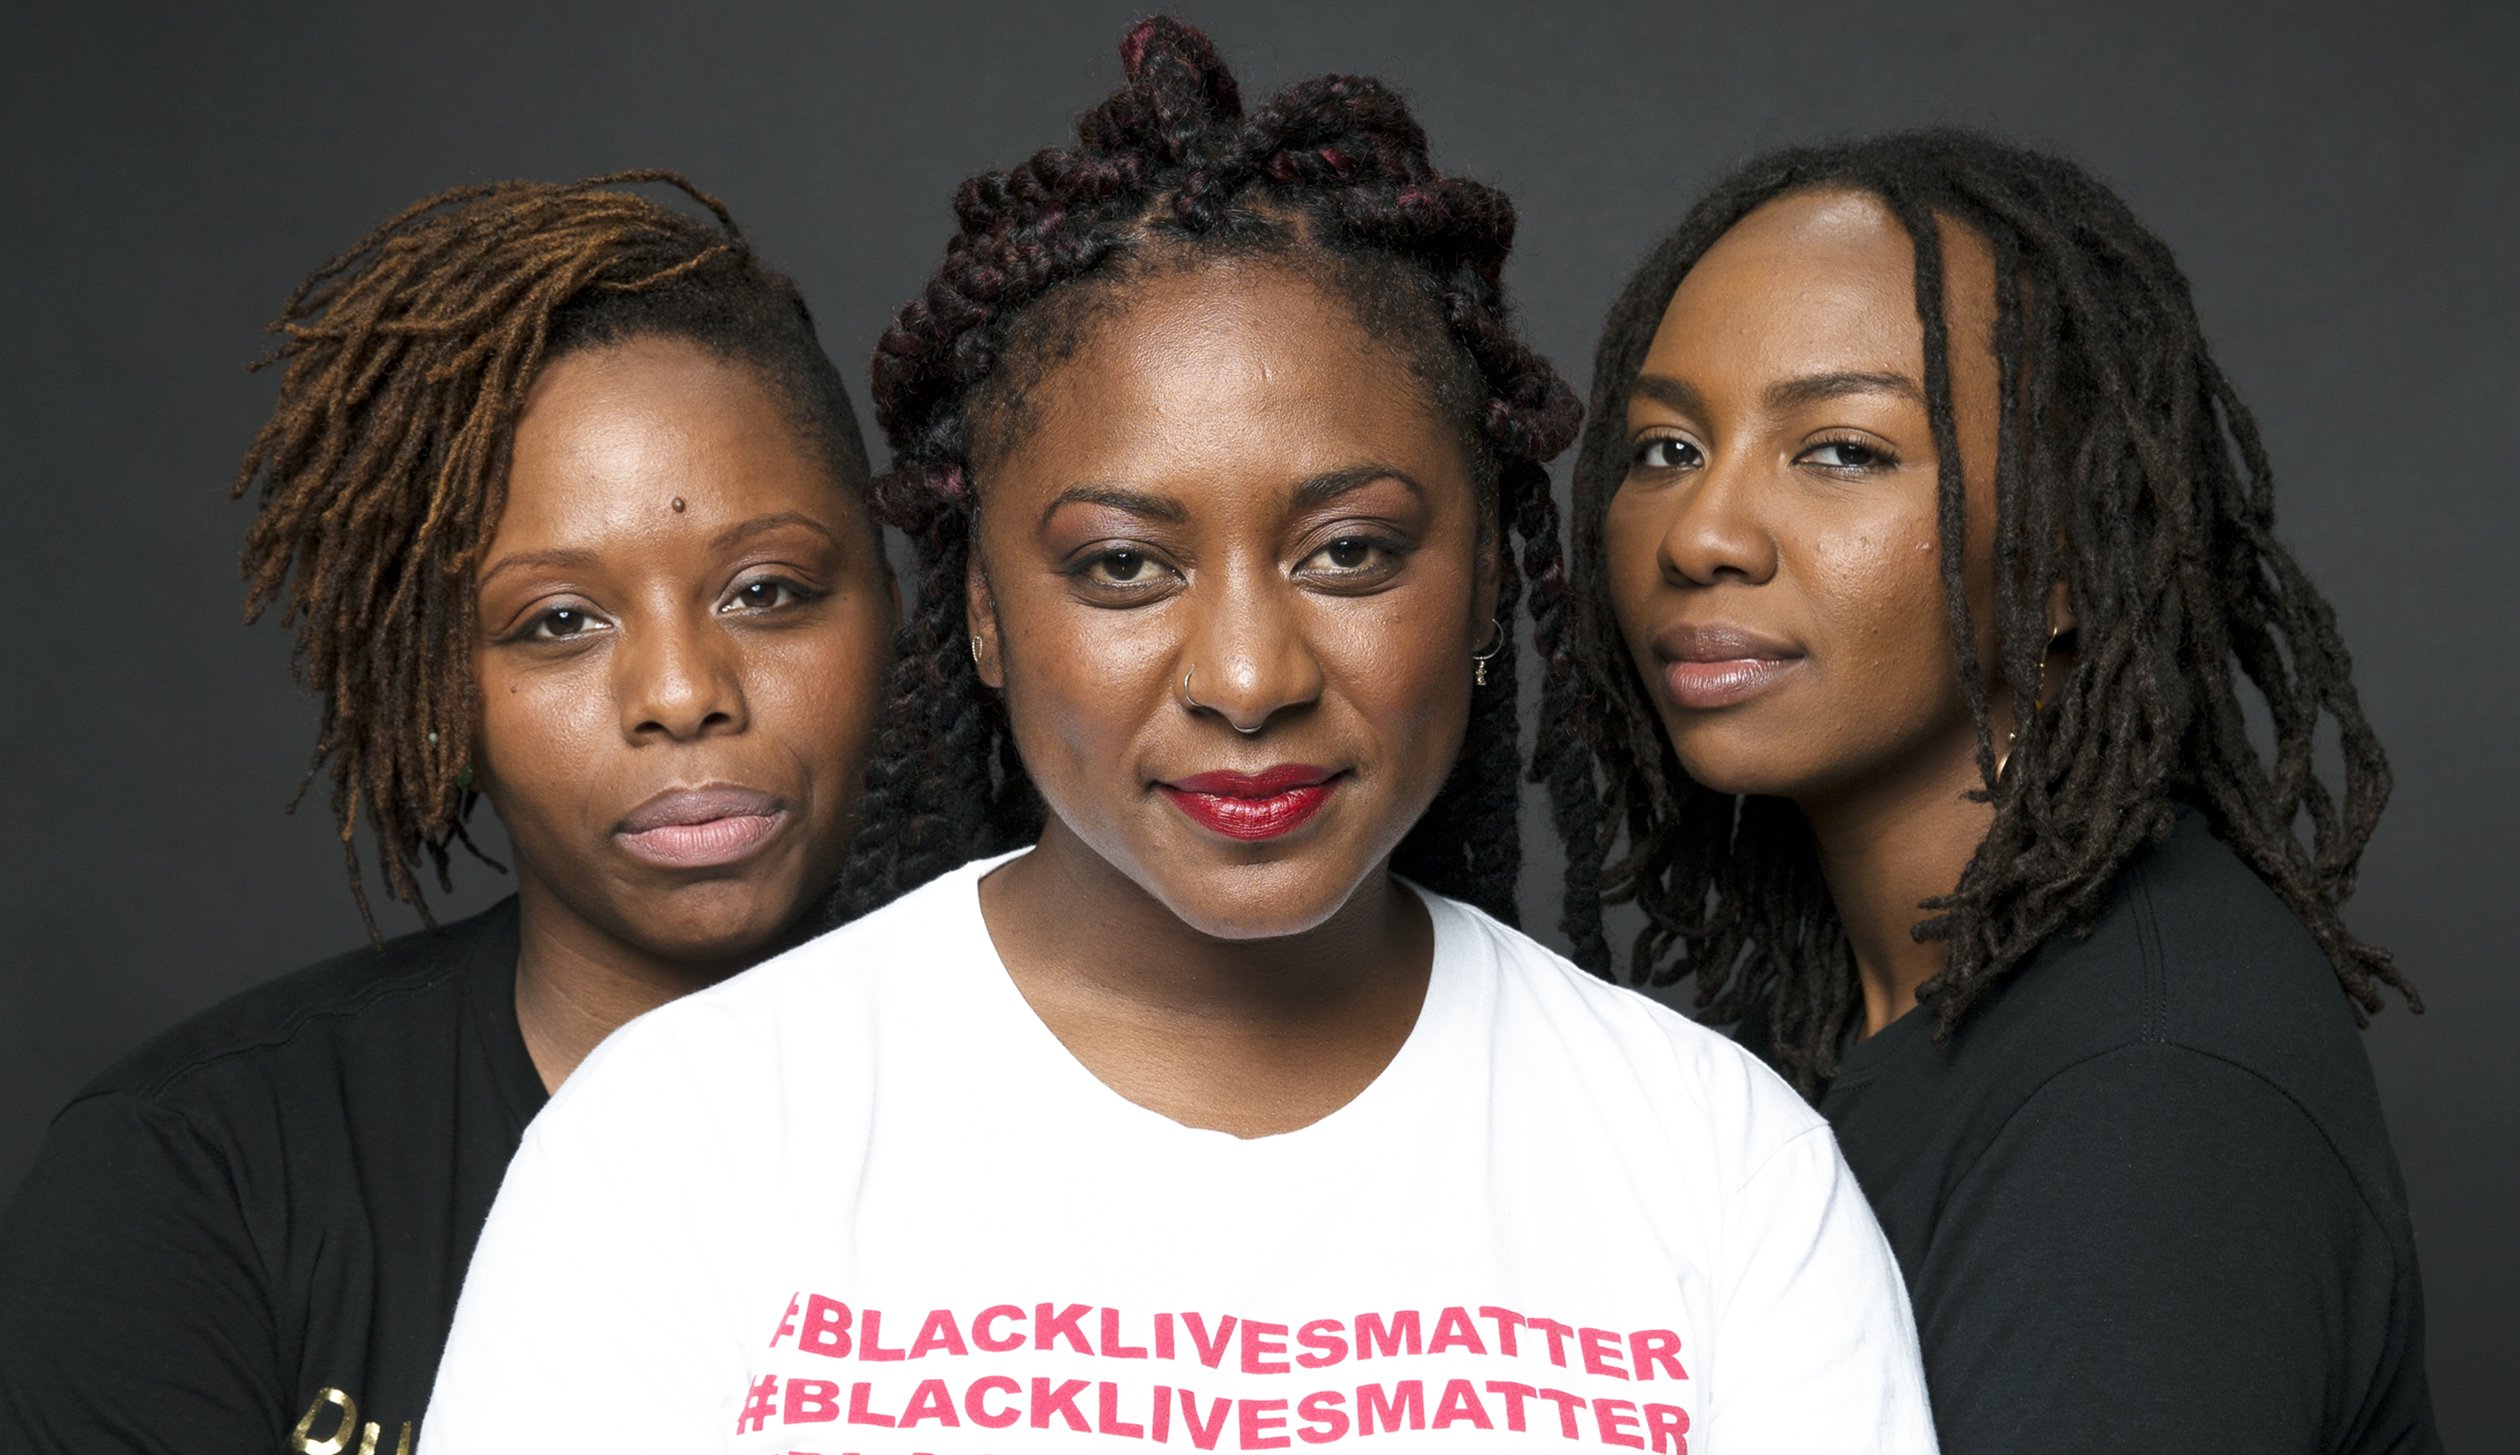 Why the Black Lives Matter Founders Are Great Leaders | Fortune